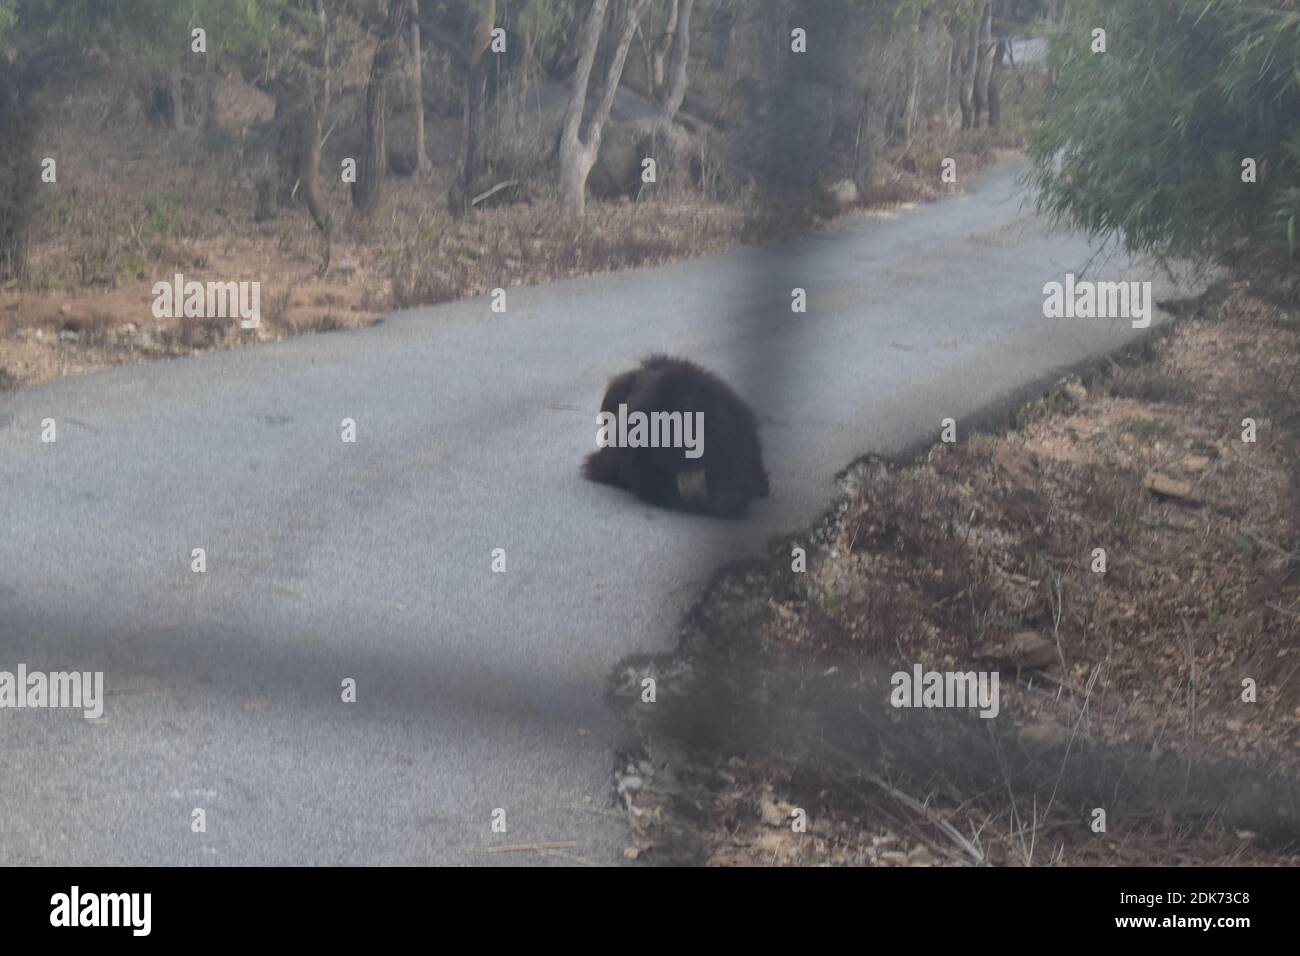 Black colored bear sleeping on the road in a national park Stock Photo